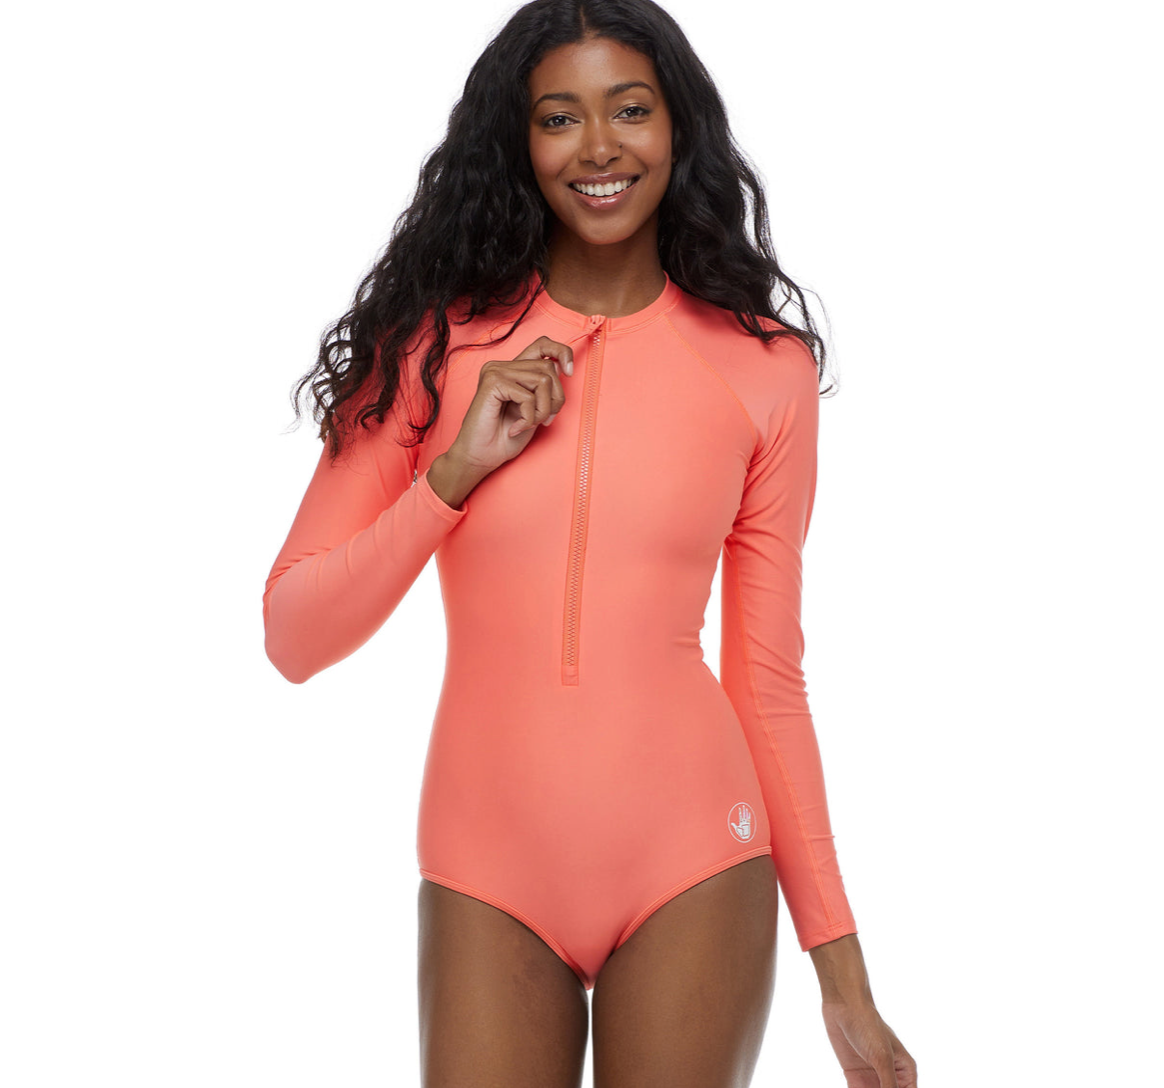 Paddle Suit - Body Glove Smoothies Chanel Paddle Suit – Makin' Waves Bermuda